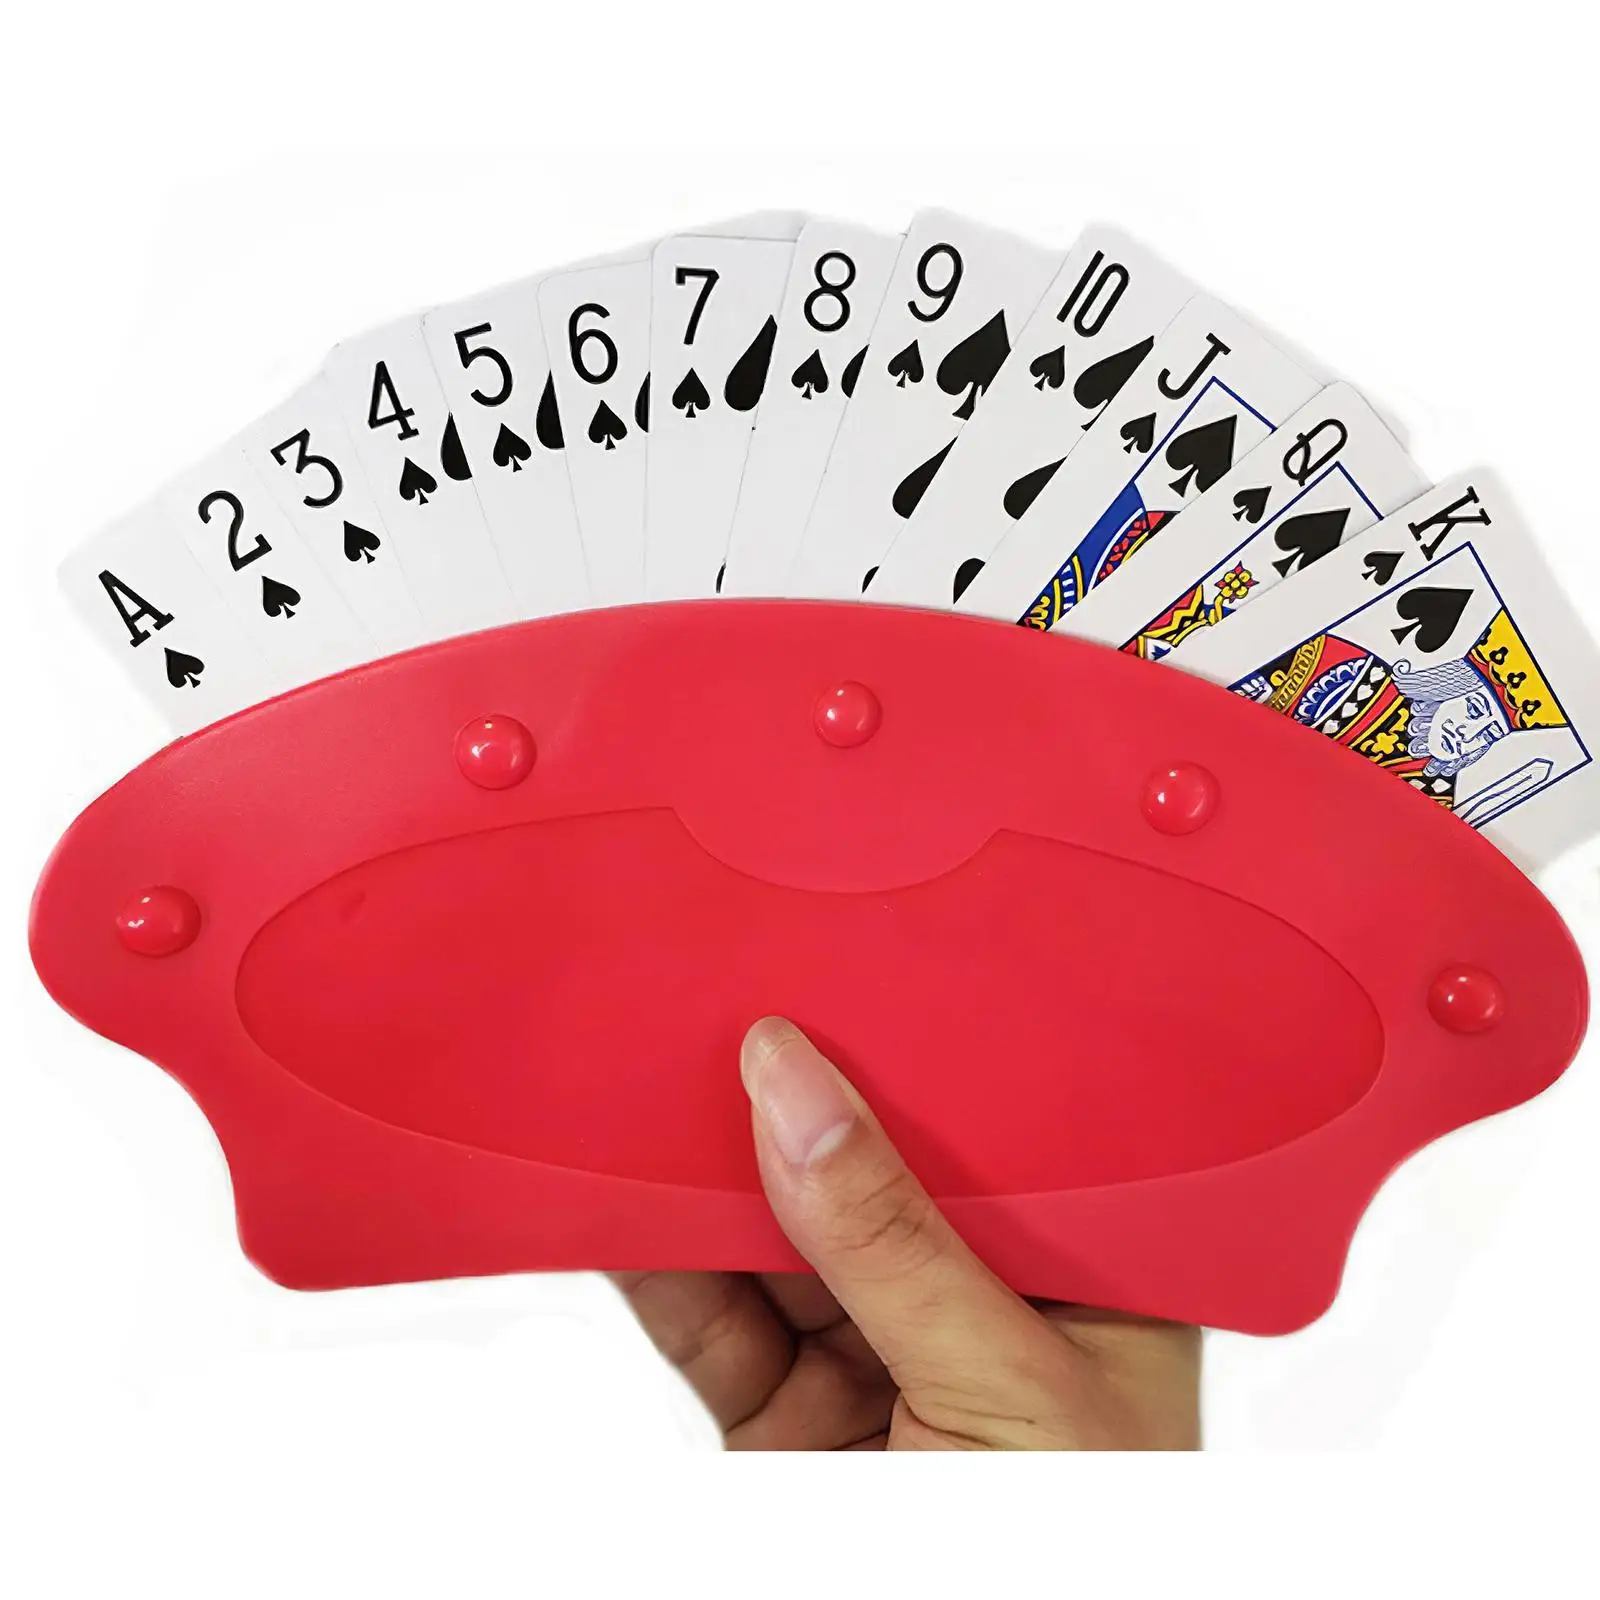 Hands Free Playing Card Holders Stand Seat, Fan Shaped,